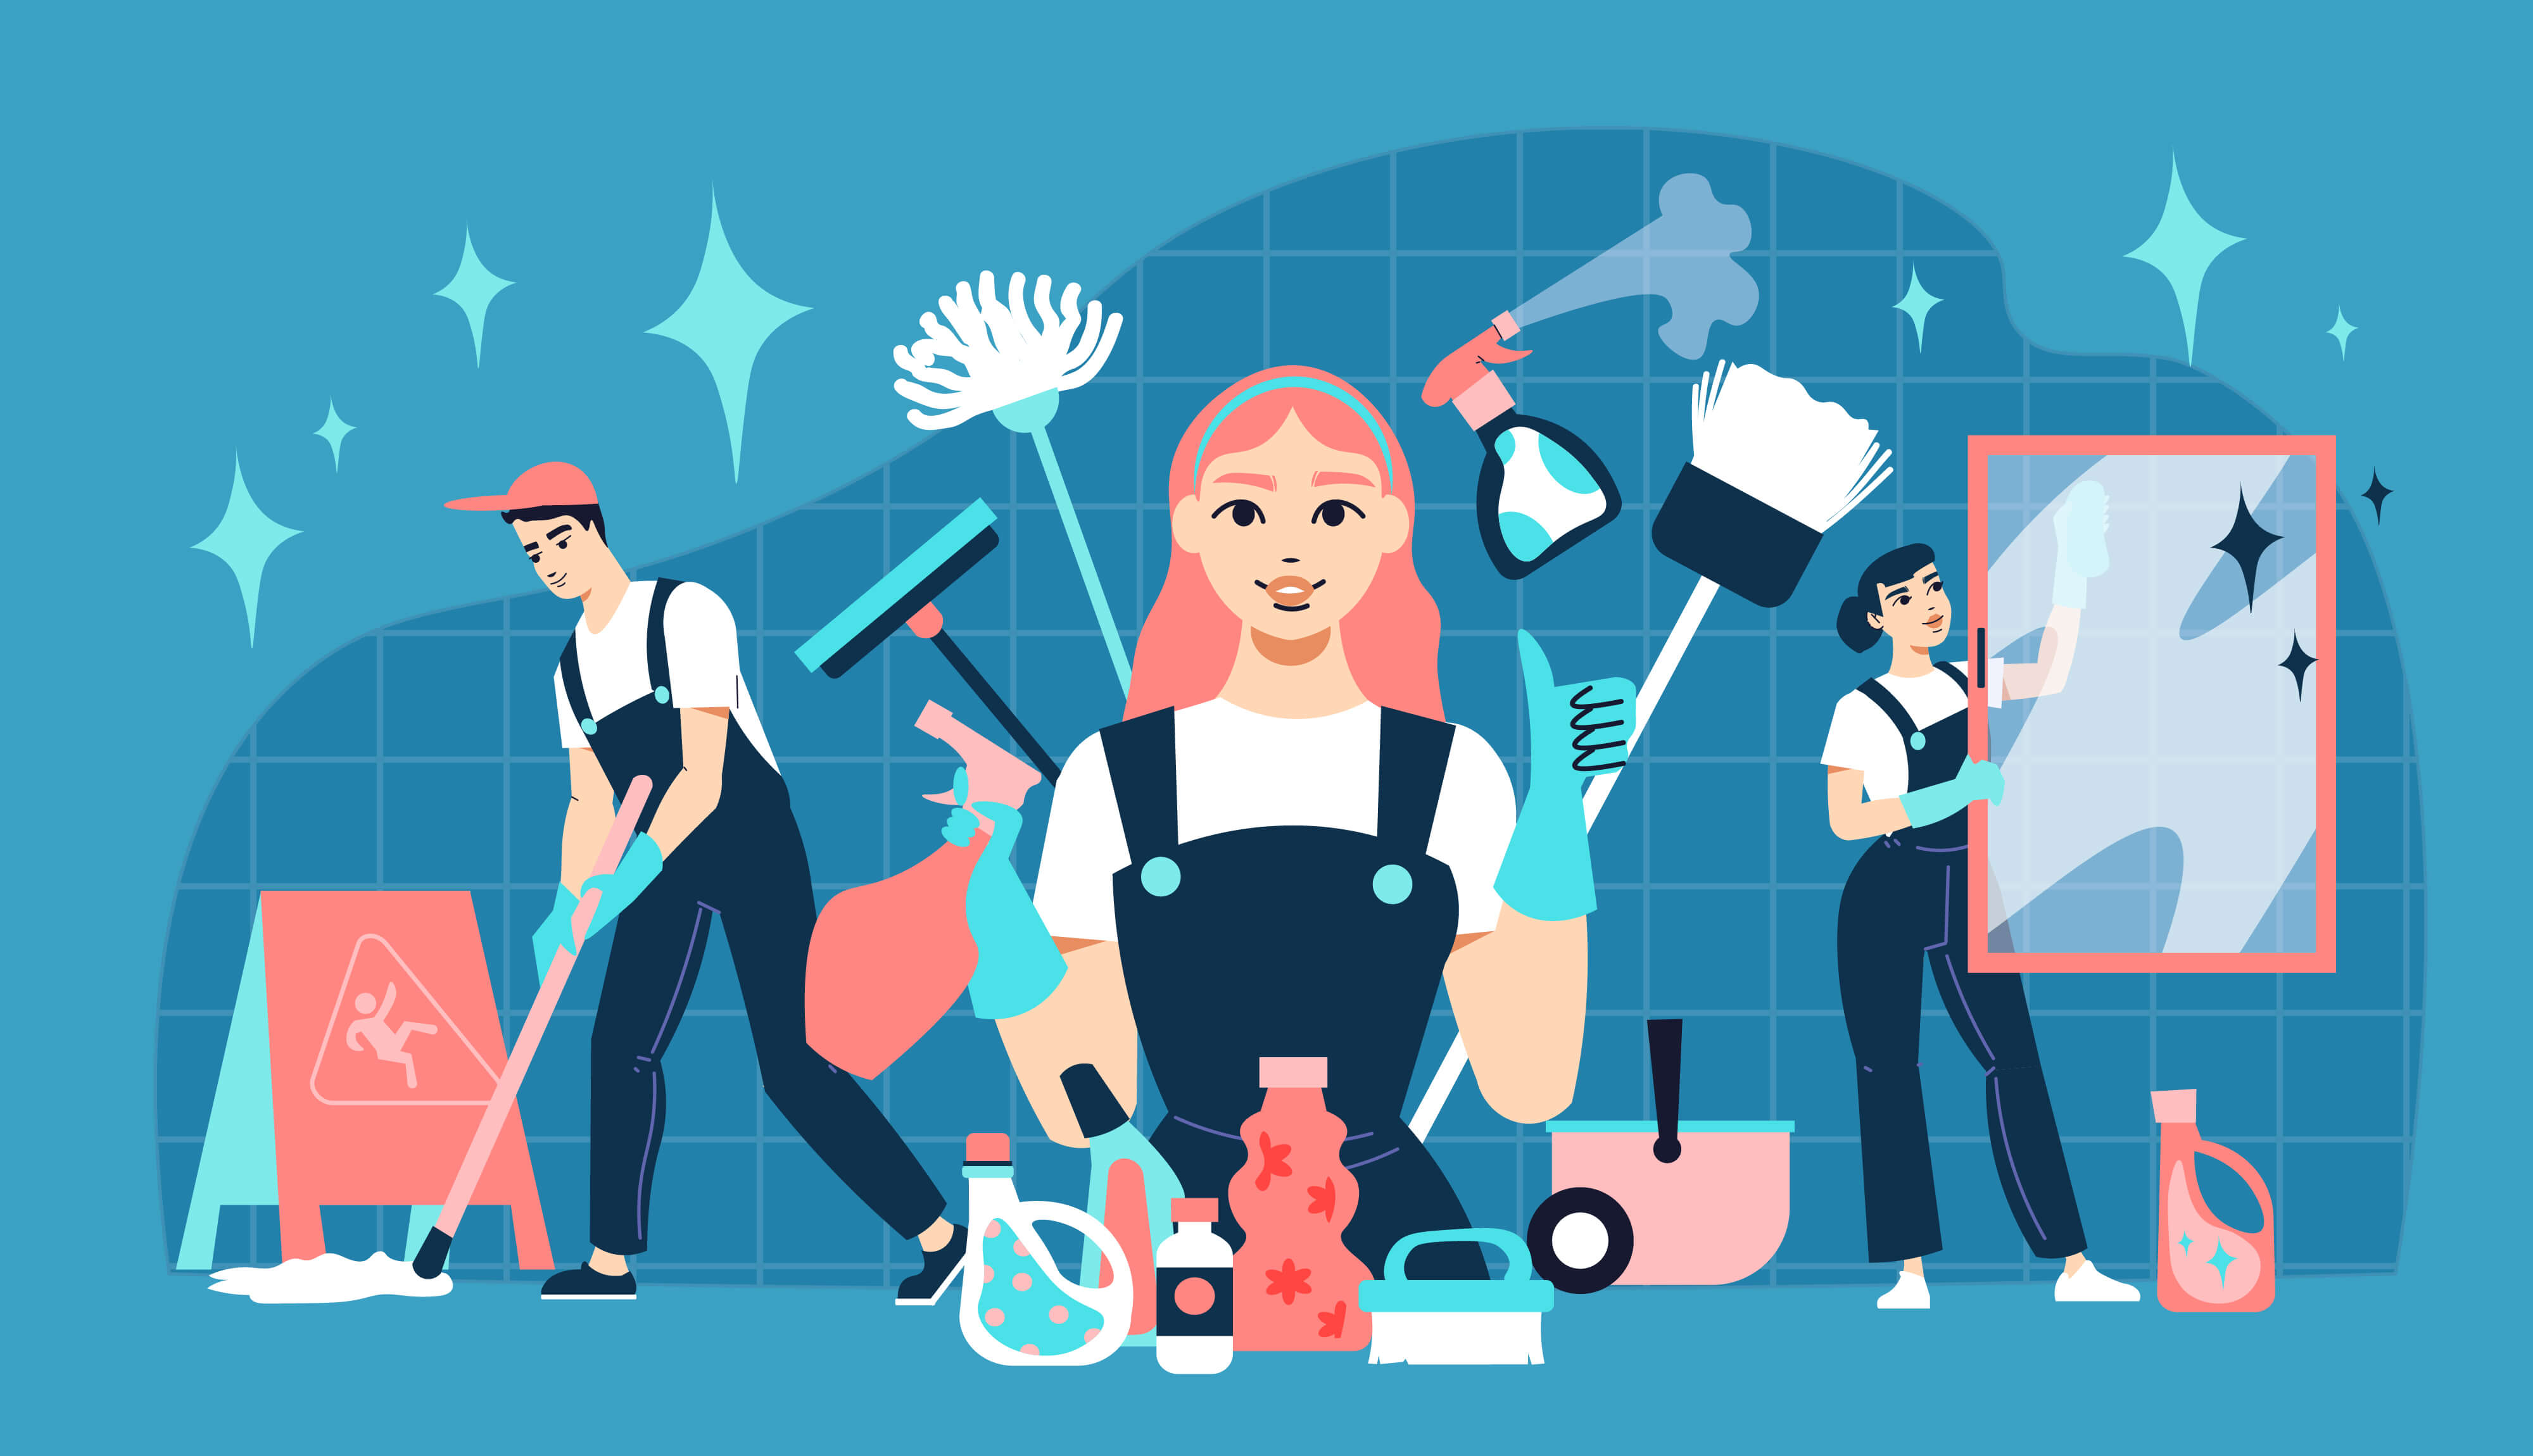 animated photo of female cleaner and her team cleaning room with a lots of cleaning equipment in blue backround